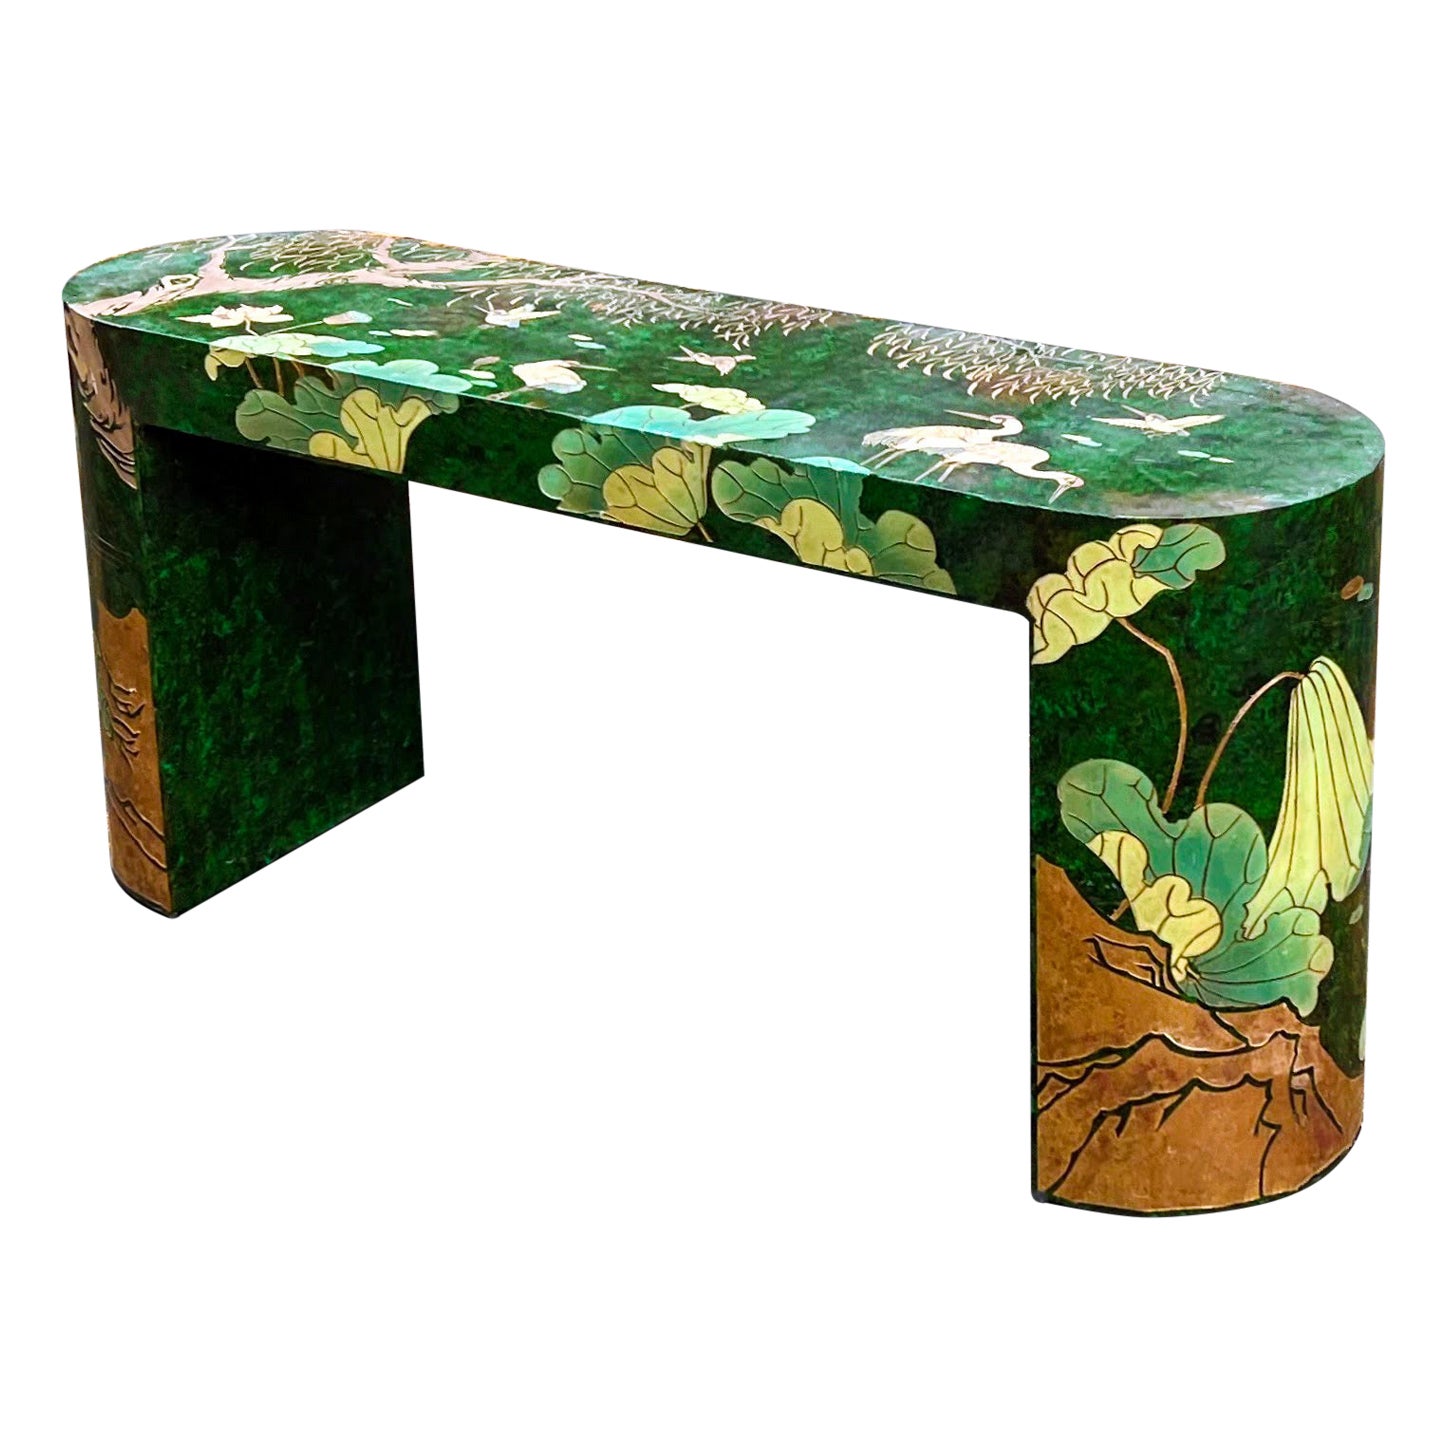 1970s Asian Modern Painted Console Table with Lotus Blossoms and Cranes